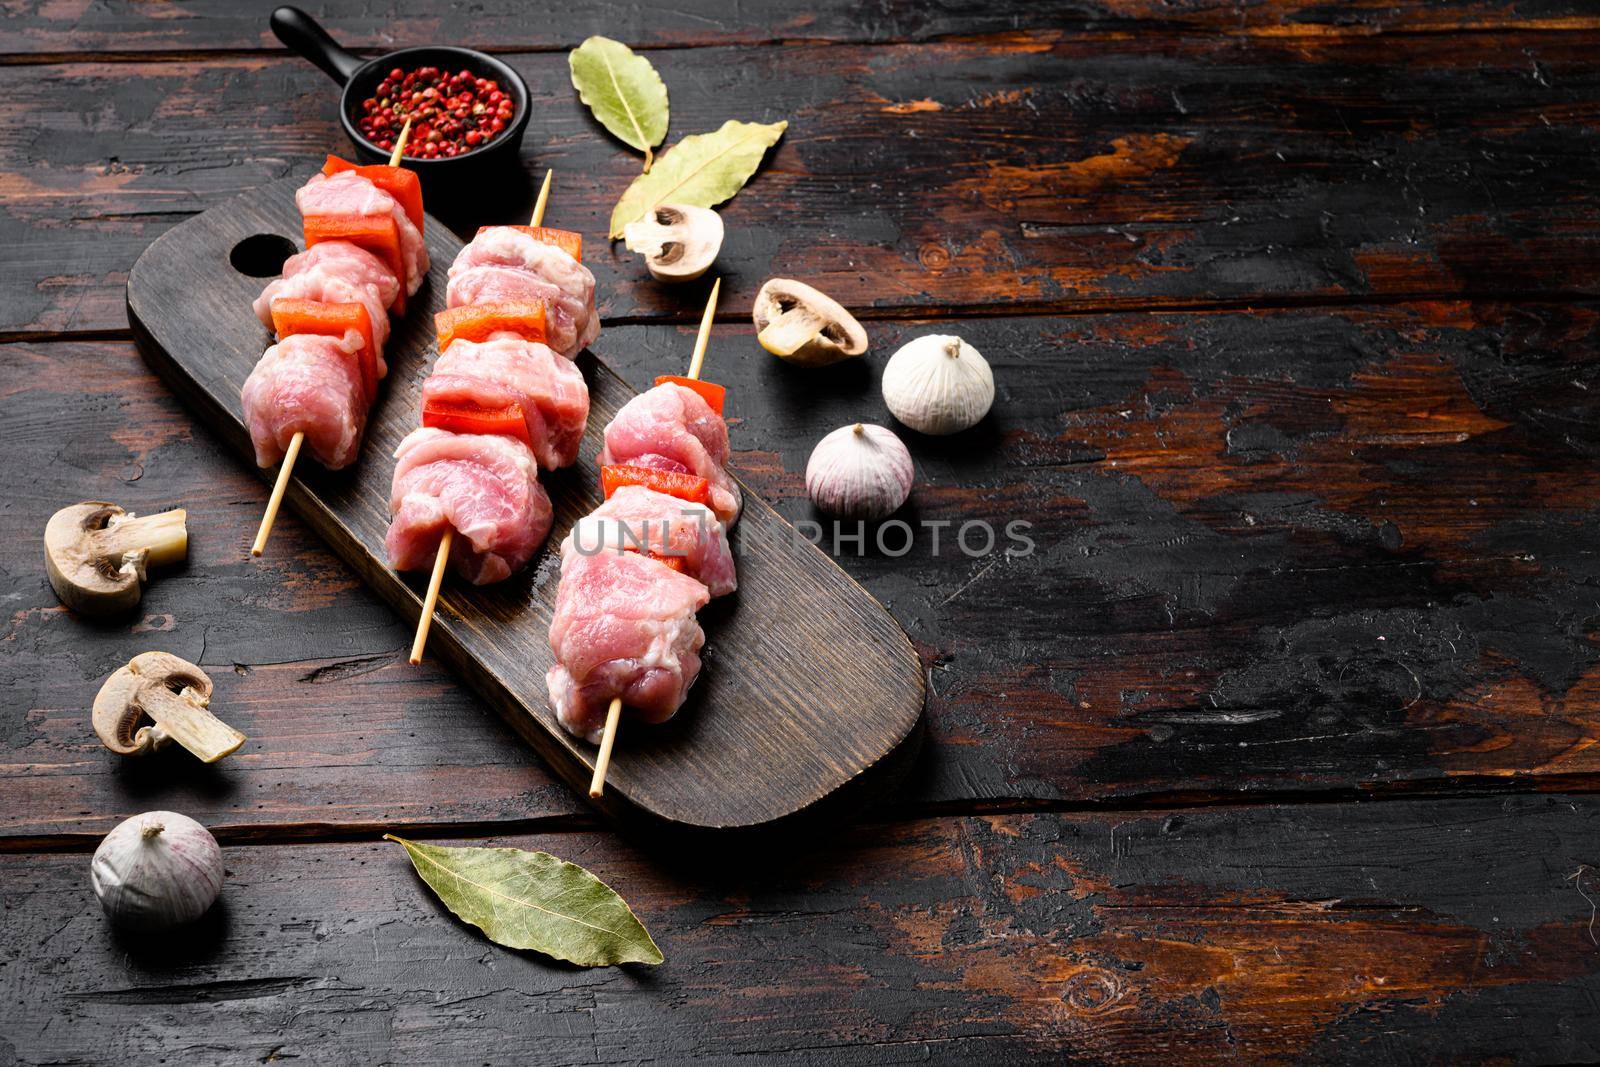 Kebabs raw meat and vegetables on skewers, with copy space for text, on old dark wooden table background by Ilianesolenyi